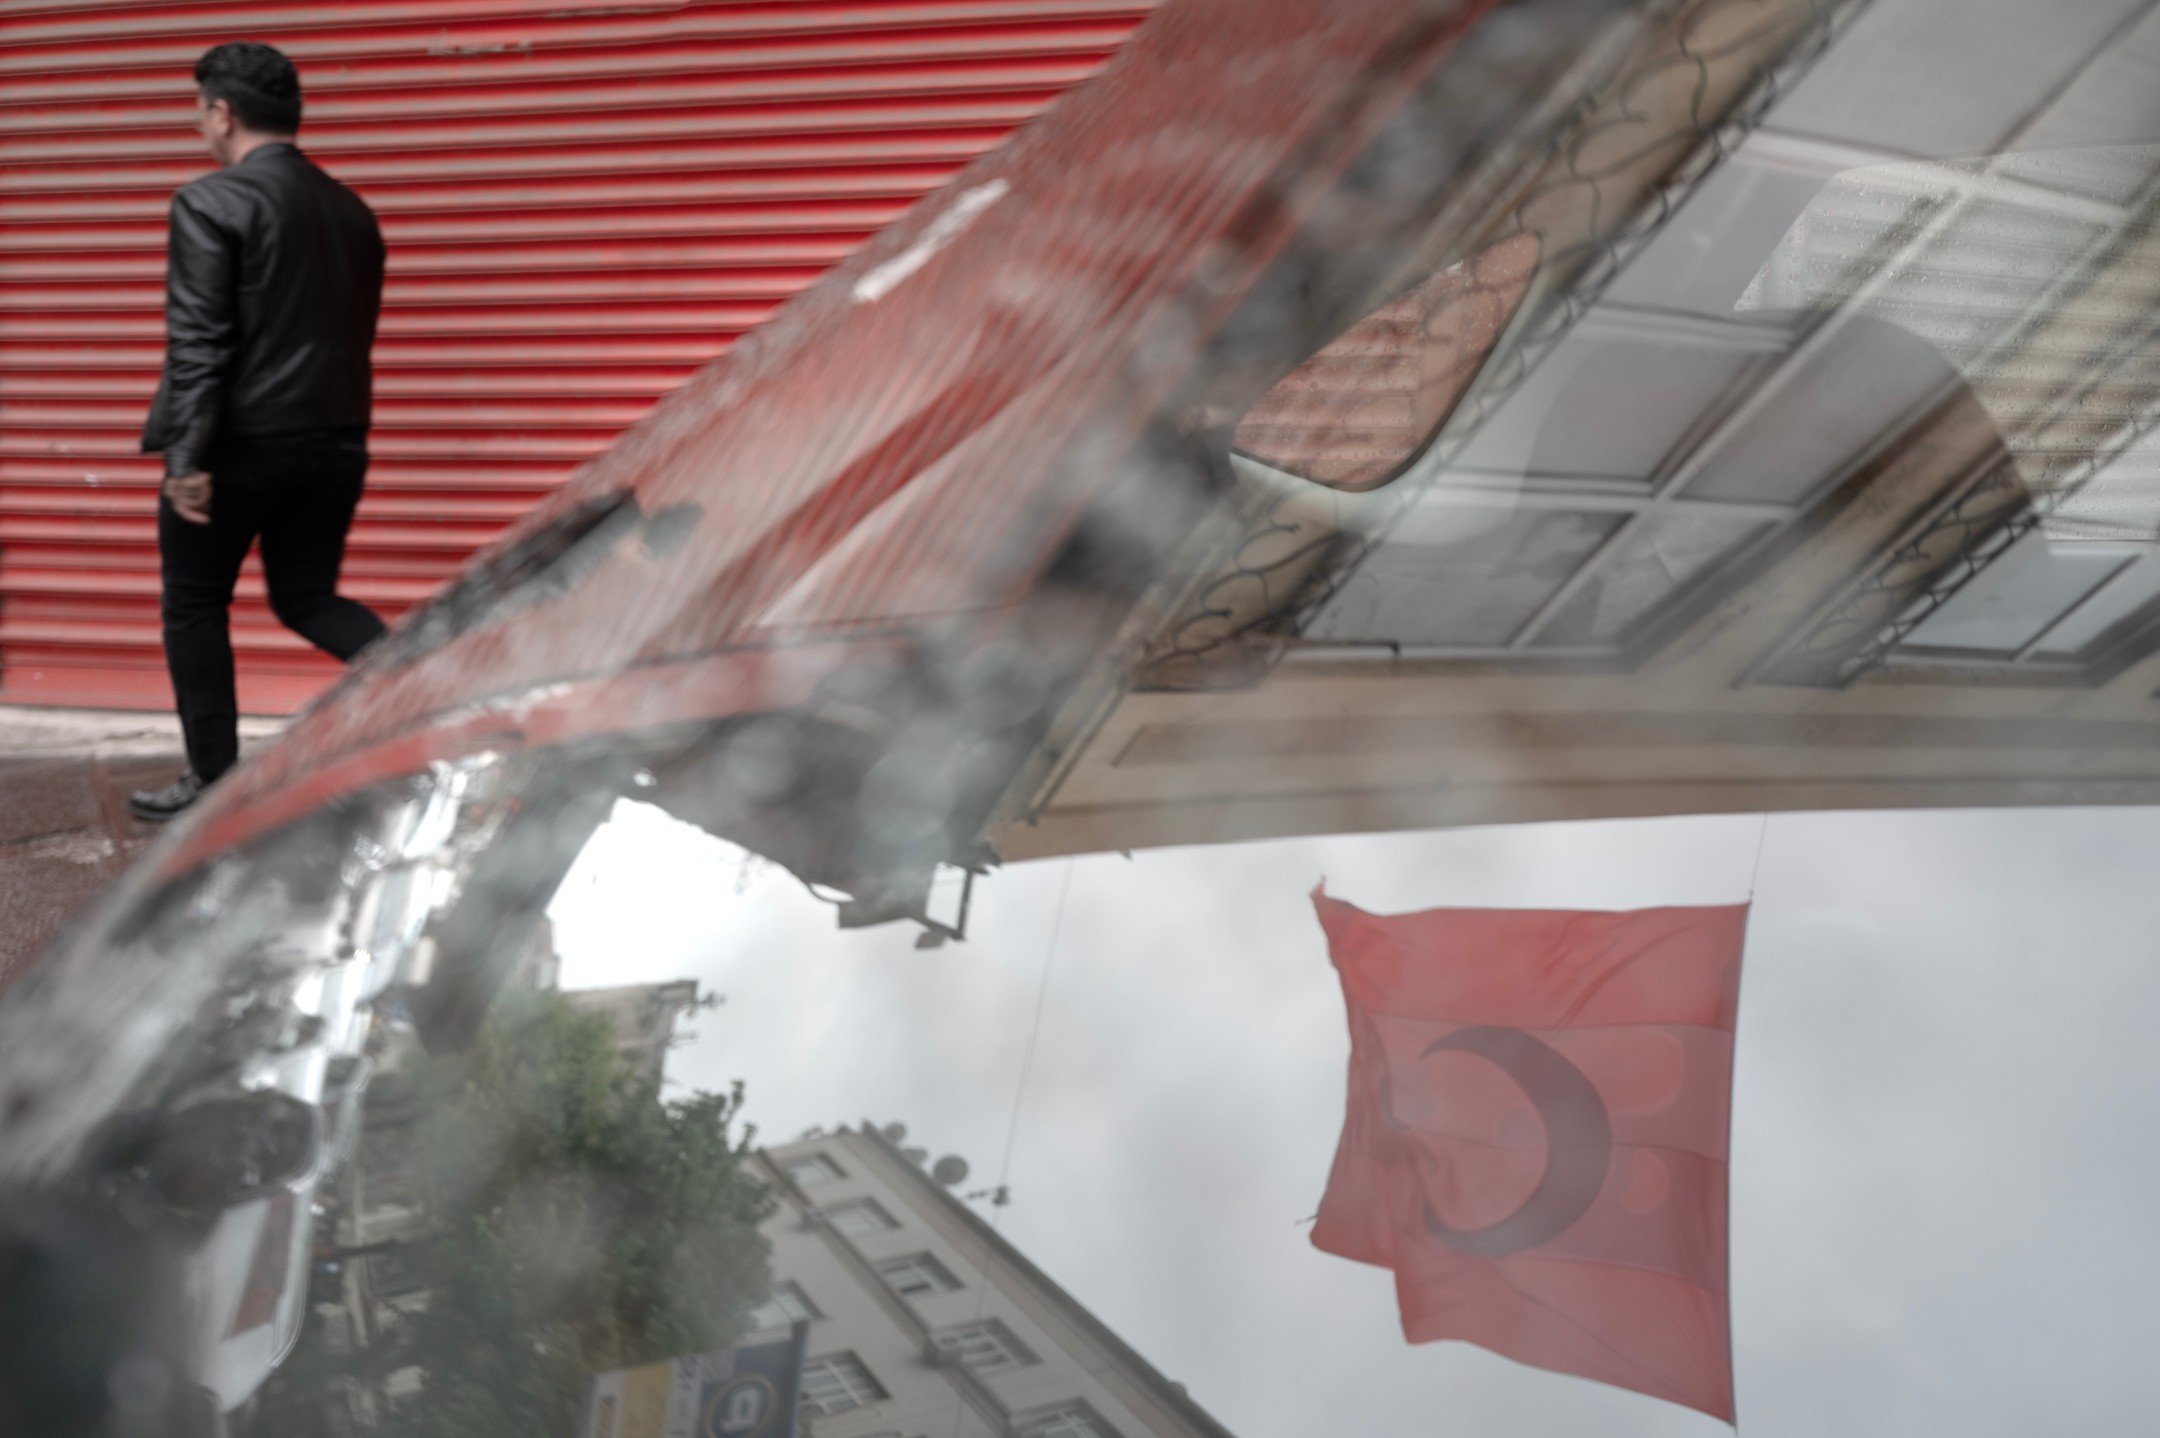 T&uuml;rkiye
They fly the flag proudly in Istanbul.
.
.
.
.
.
#leicaQ #street #thestreetsoup_artgallery #streetlevelphotography #street #streetstyle #streetphotography #photo #fotografa #photography #fotografia #fotografo #photooftheday #photographer